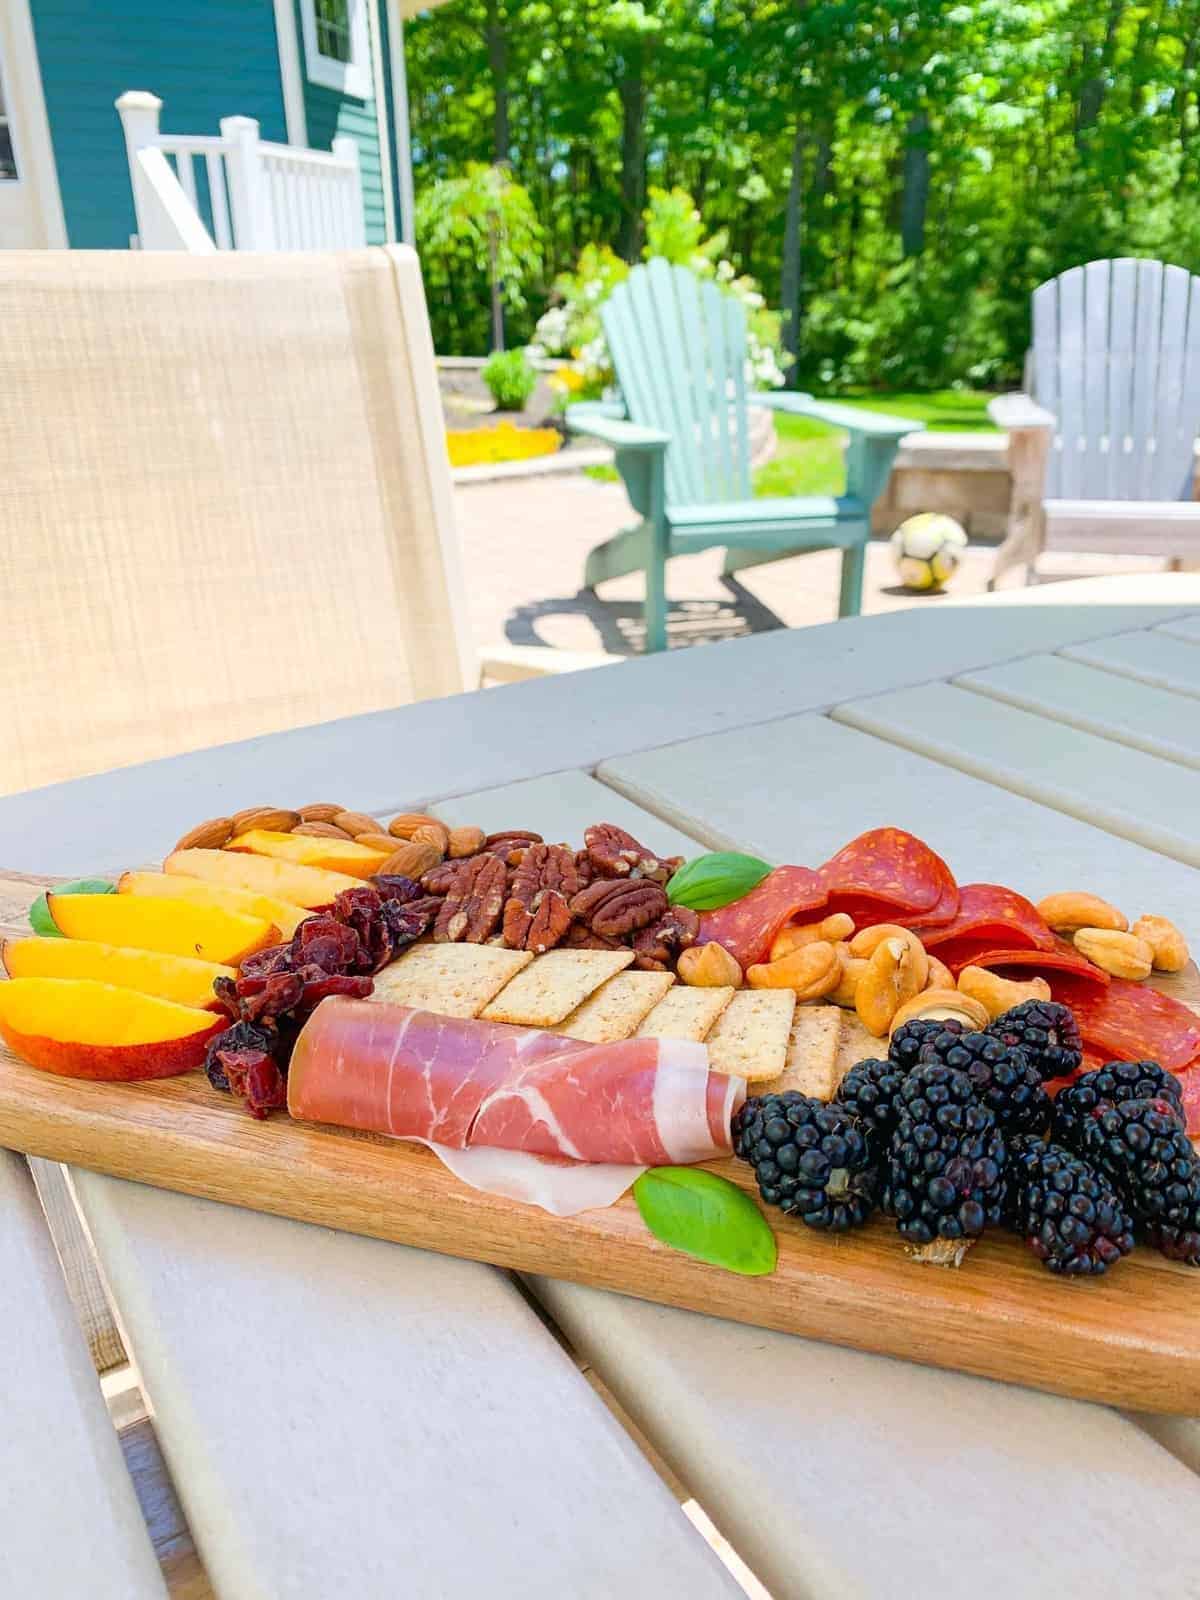 A charcuterie board with an assortment of meats, cheeses, fruits, and nuts on an outdoor patio table.